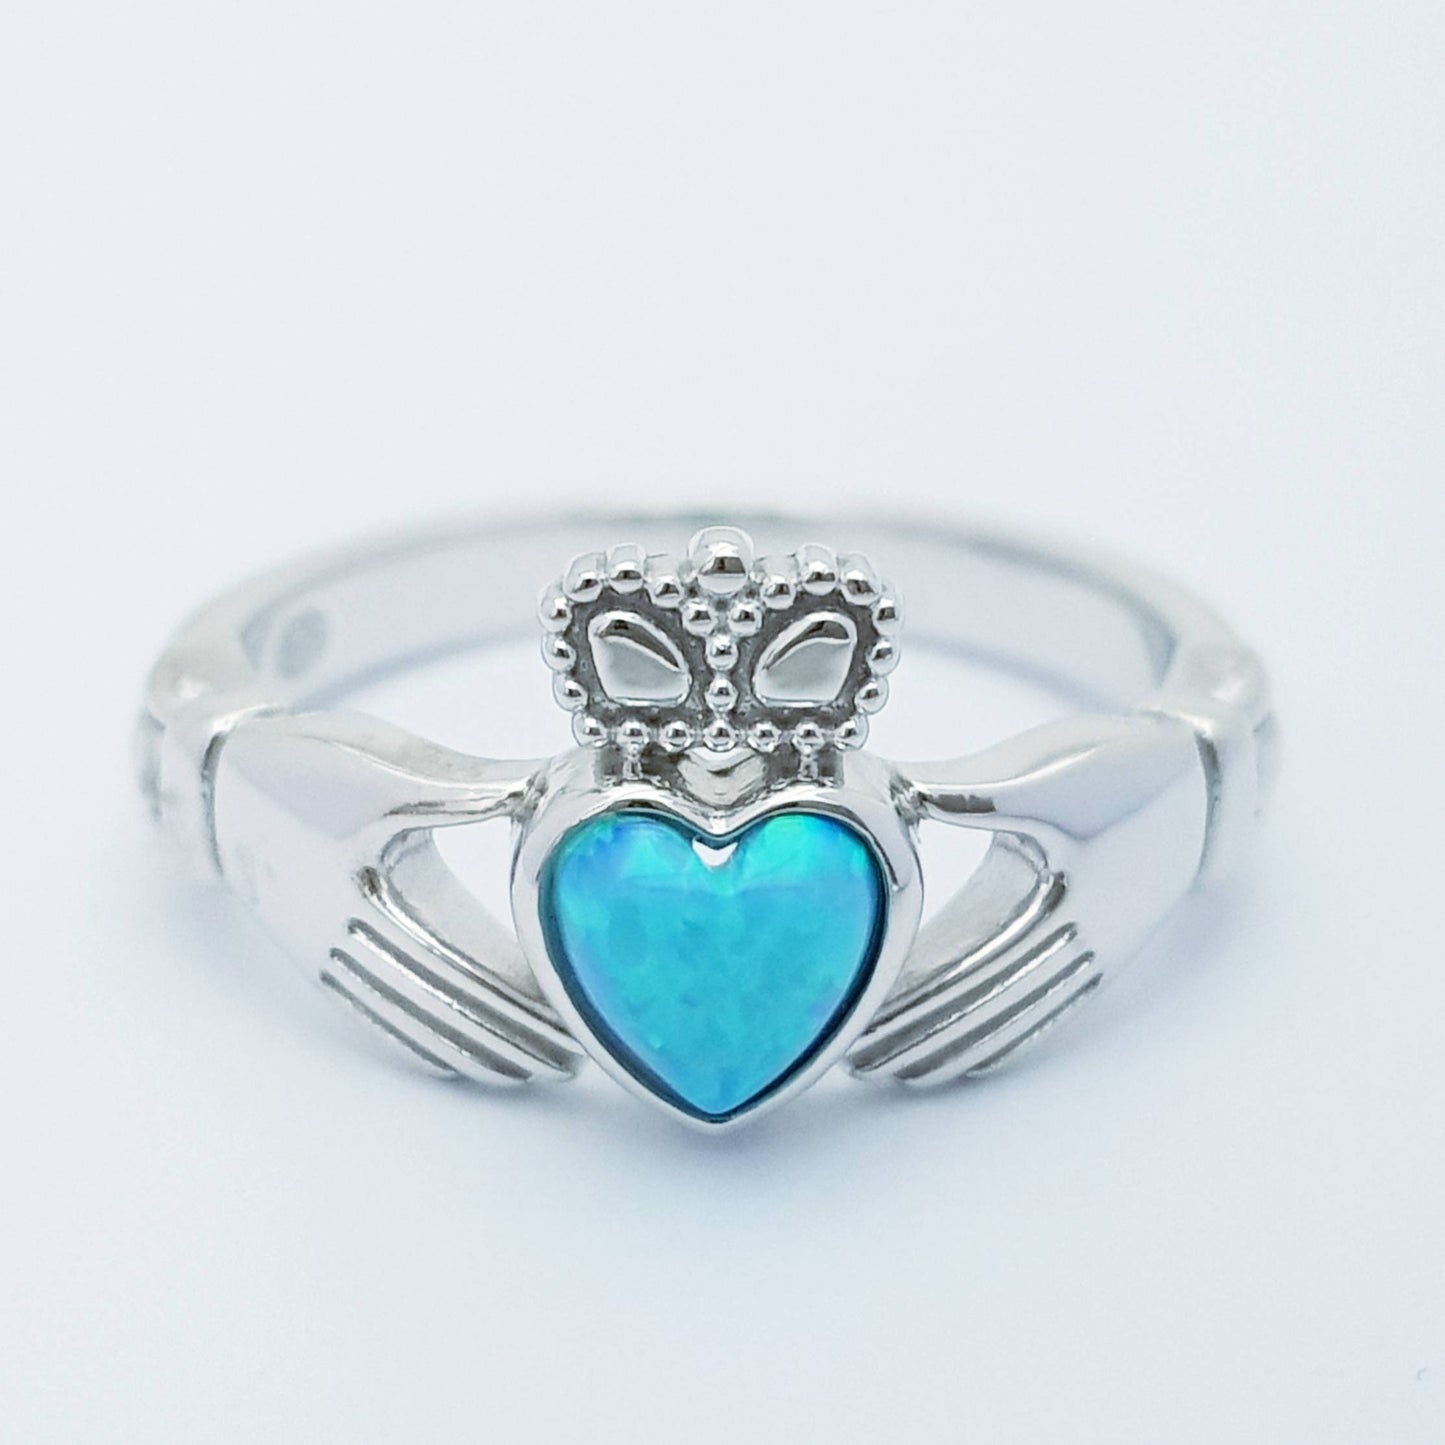 Sterling Silver Claddagh ring set with opal stone, October birthstone